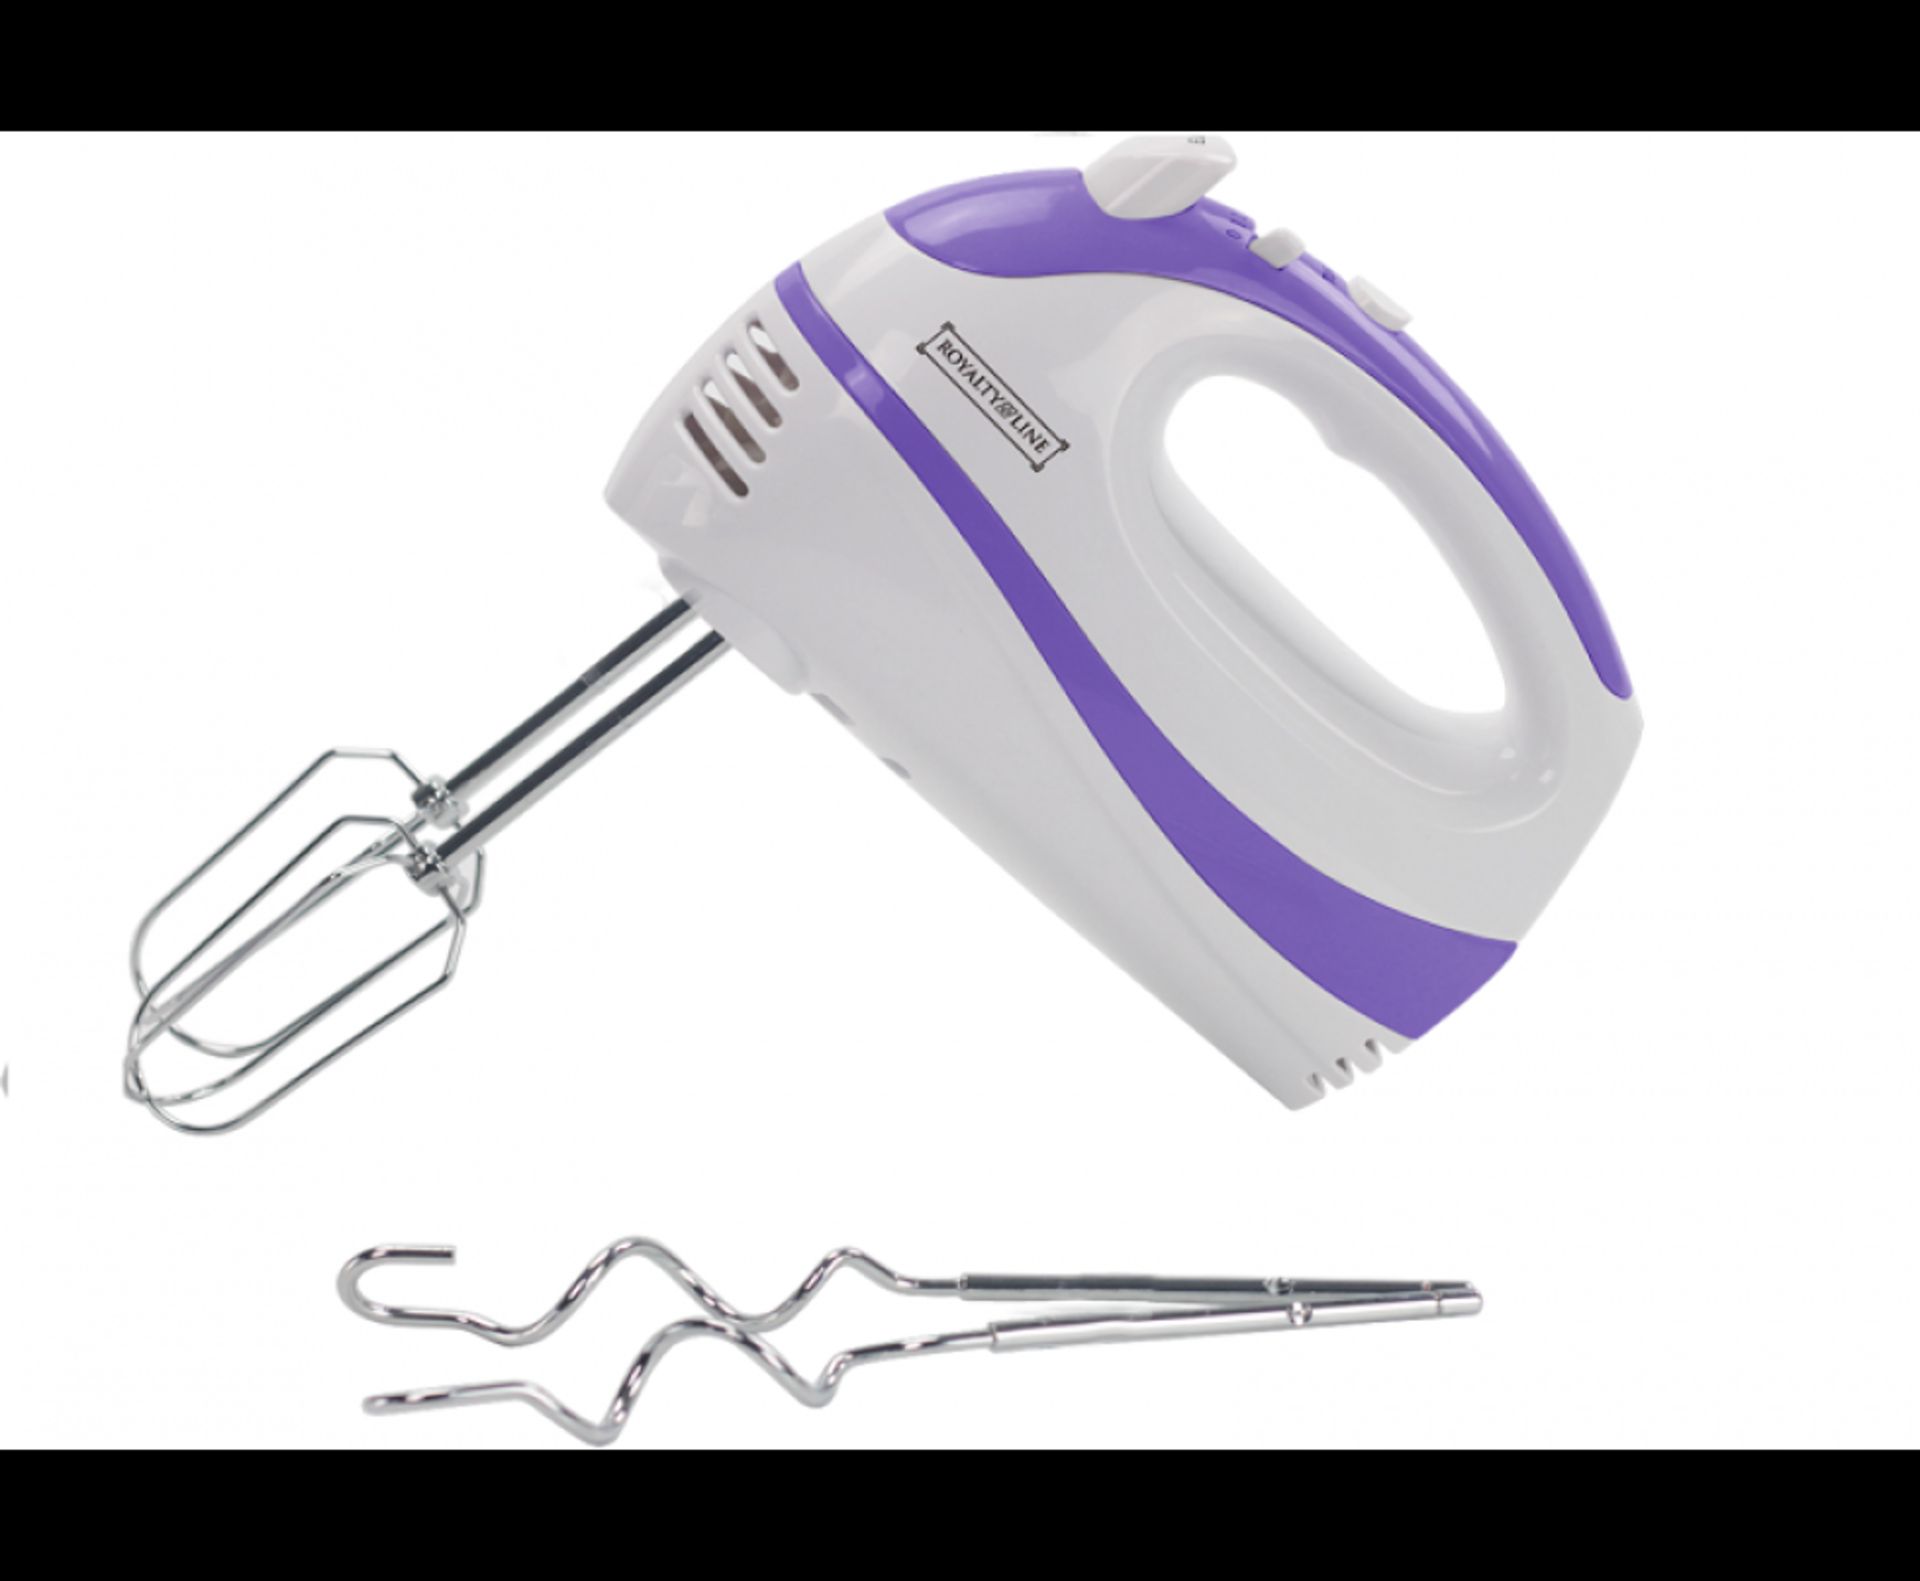 V Brand New 200w Hand Mixer X 2 YOUR BID PRICE TO BE MULTIPLIED BY TWO